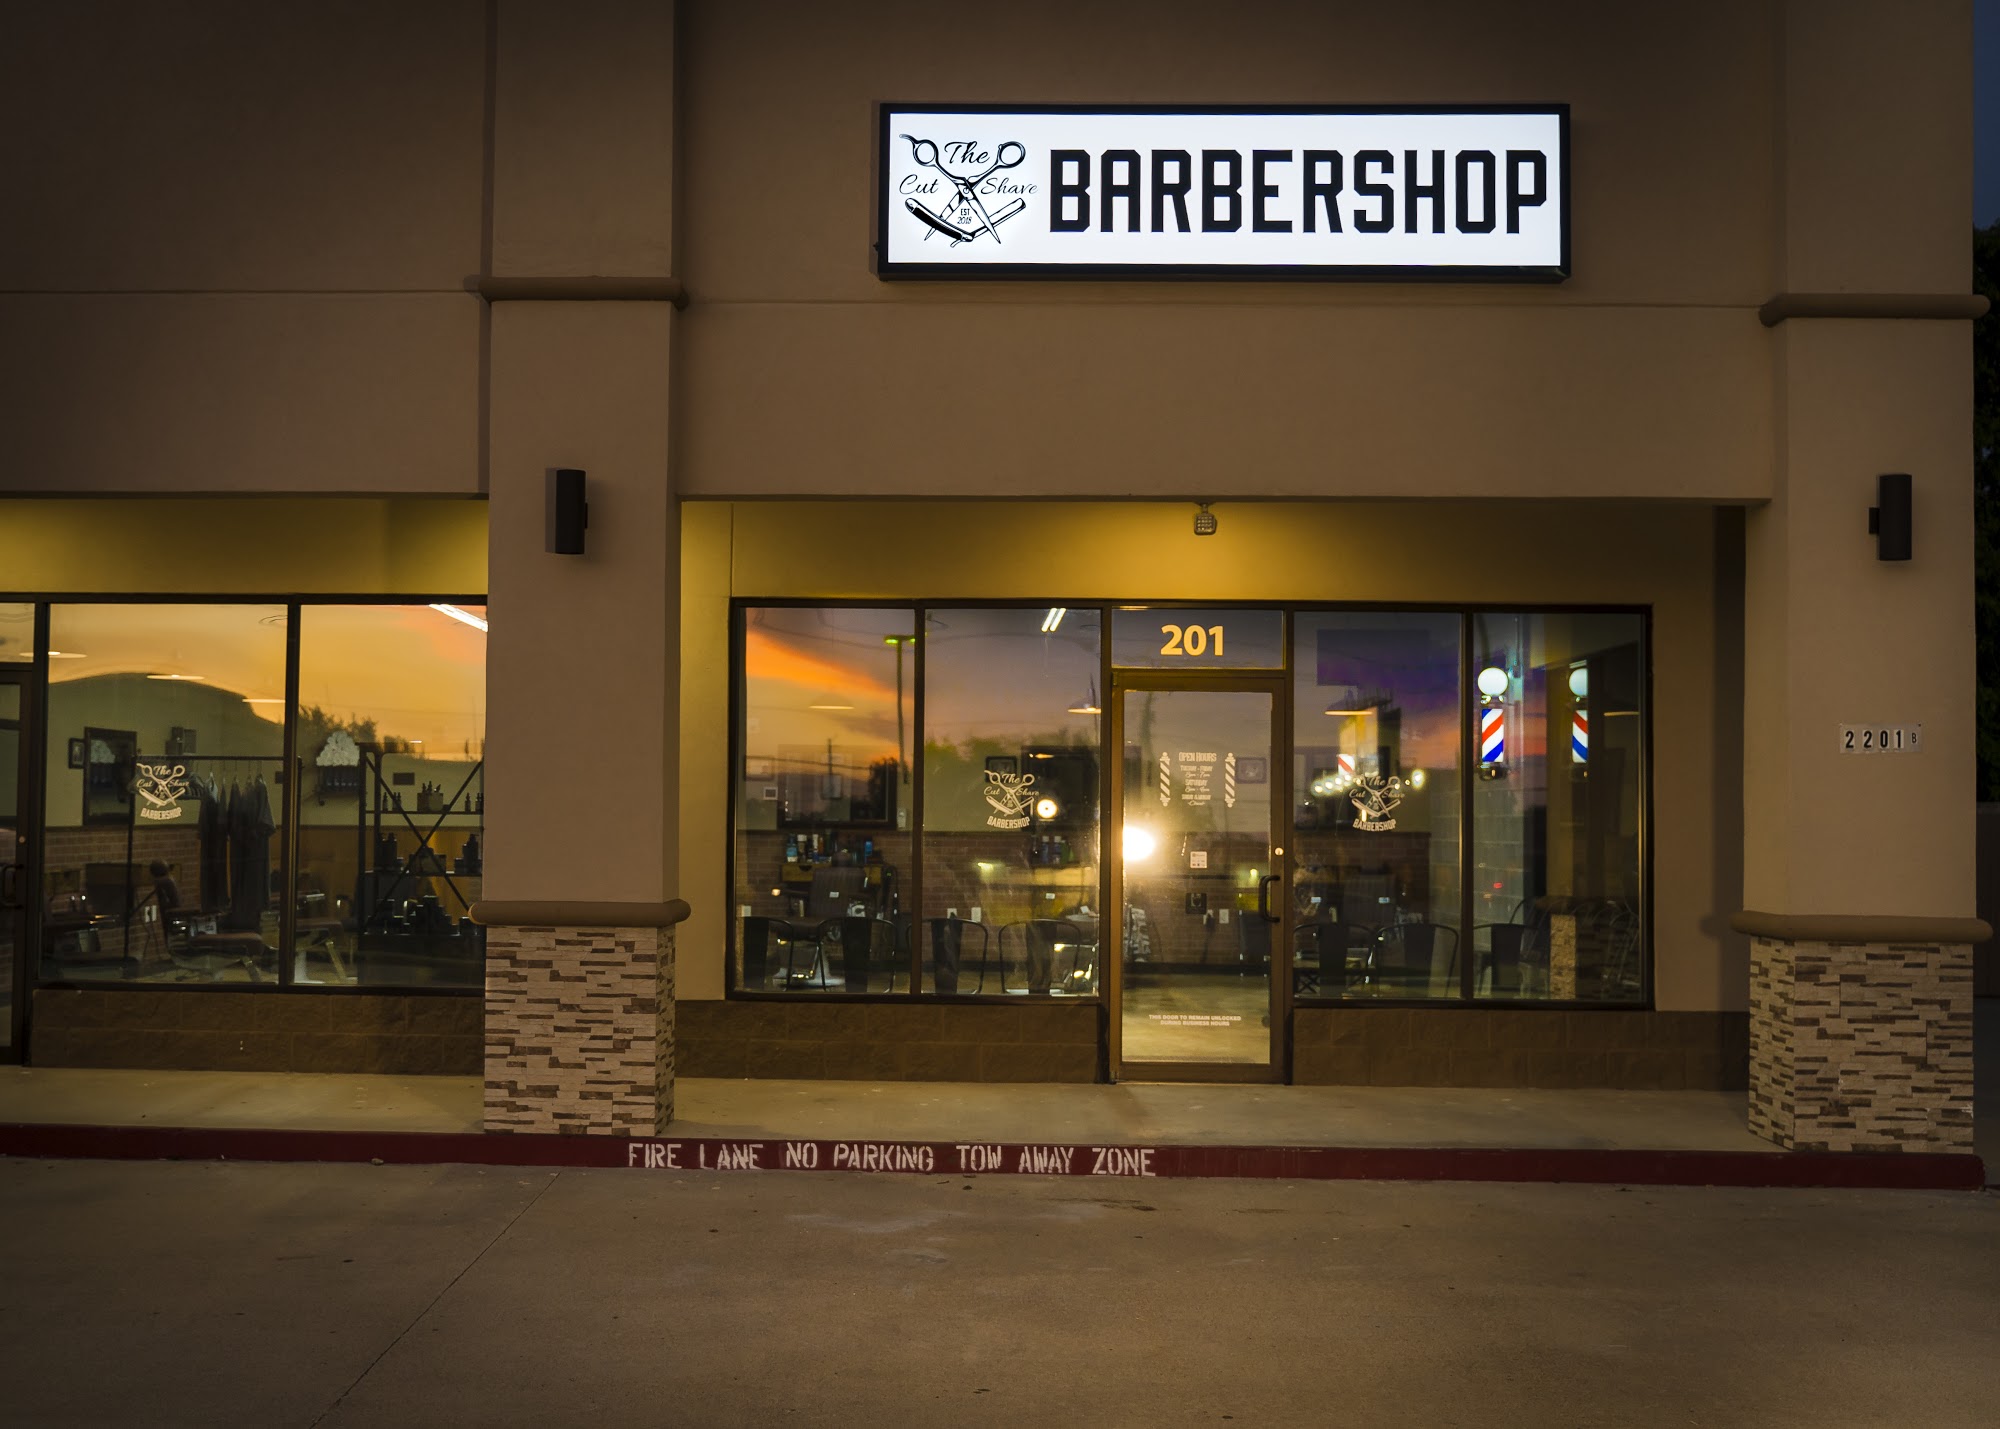 The Cut and Shave Barbershop